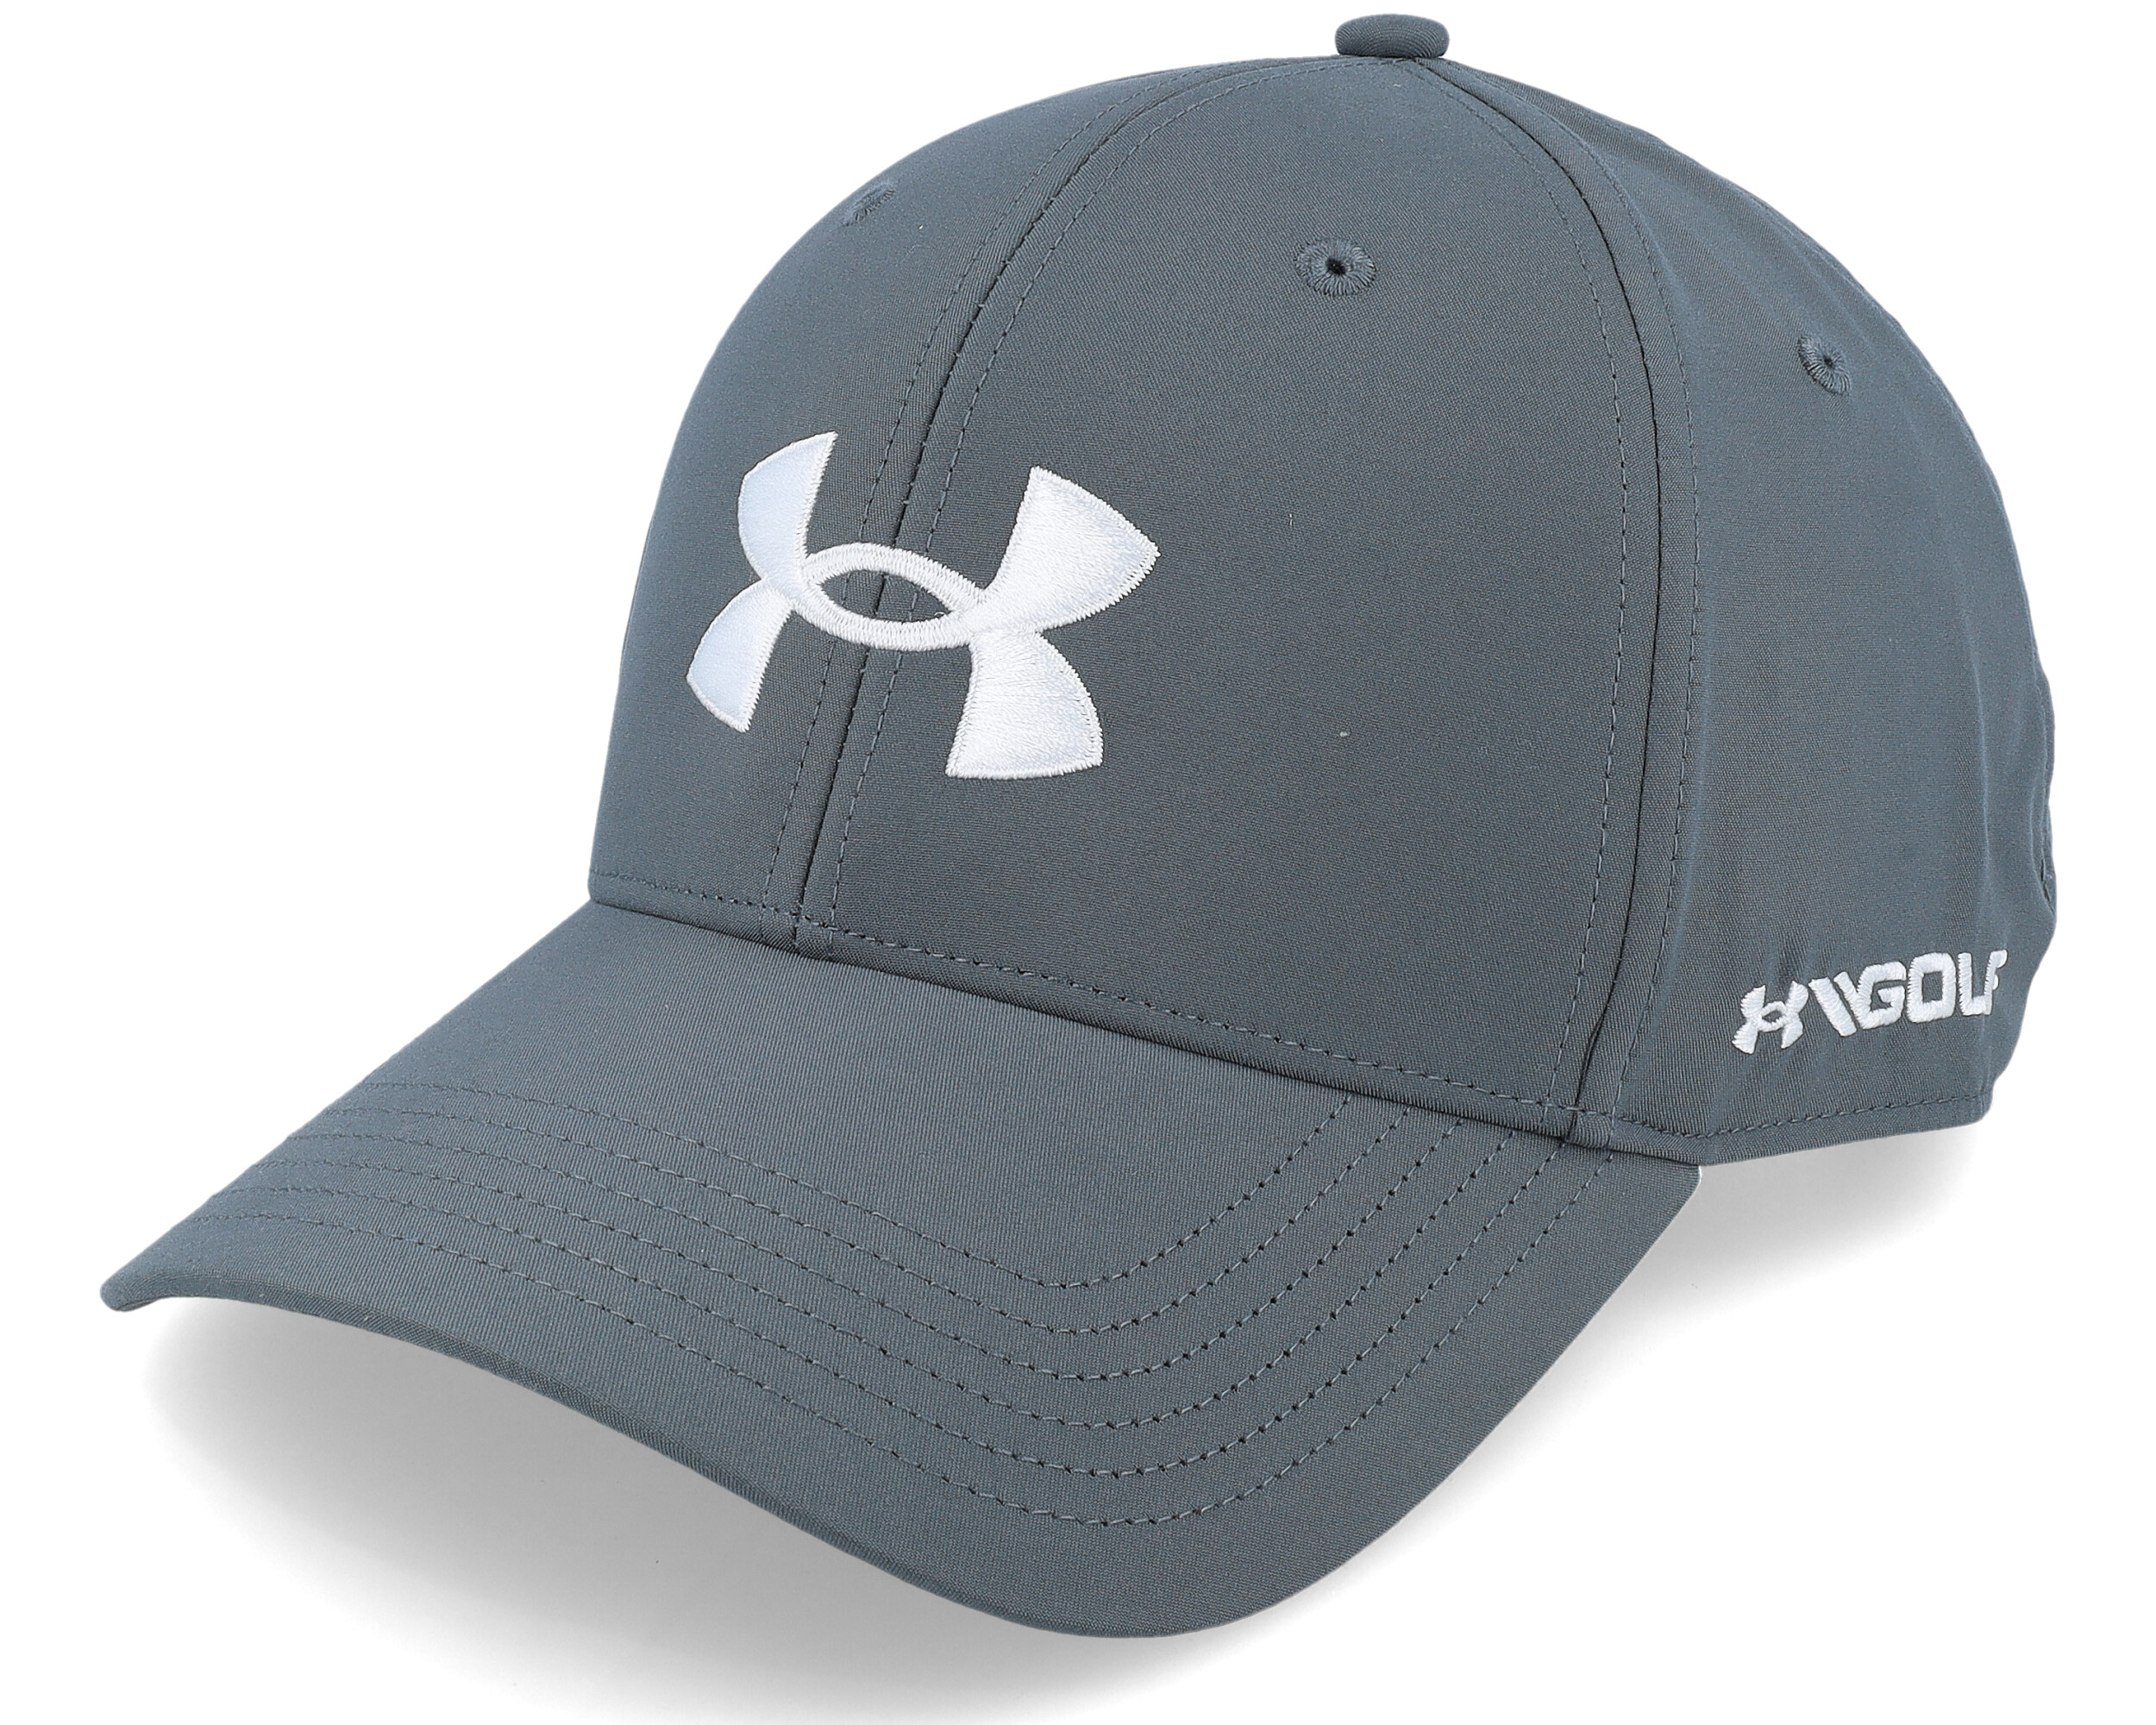 Golf 96 Hat Pitch Gray Adjustable - Under Armour cap